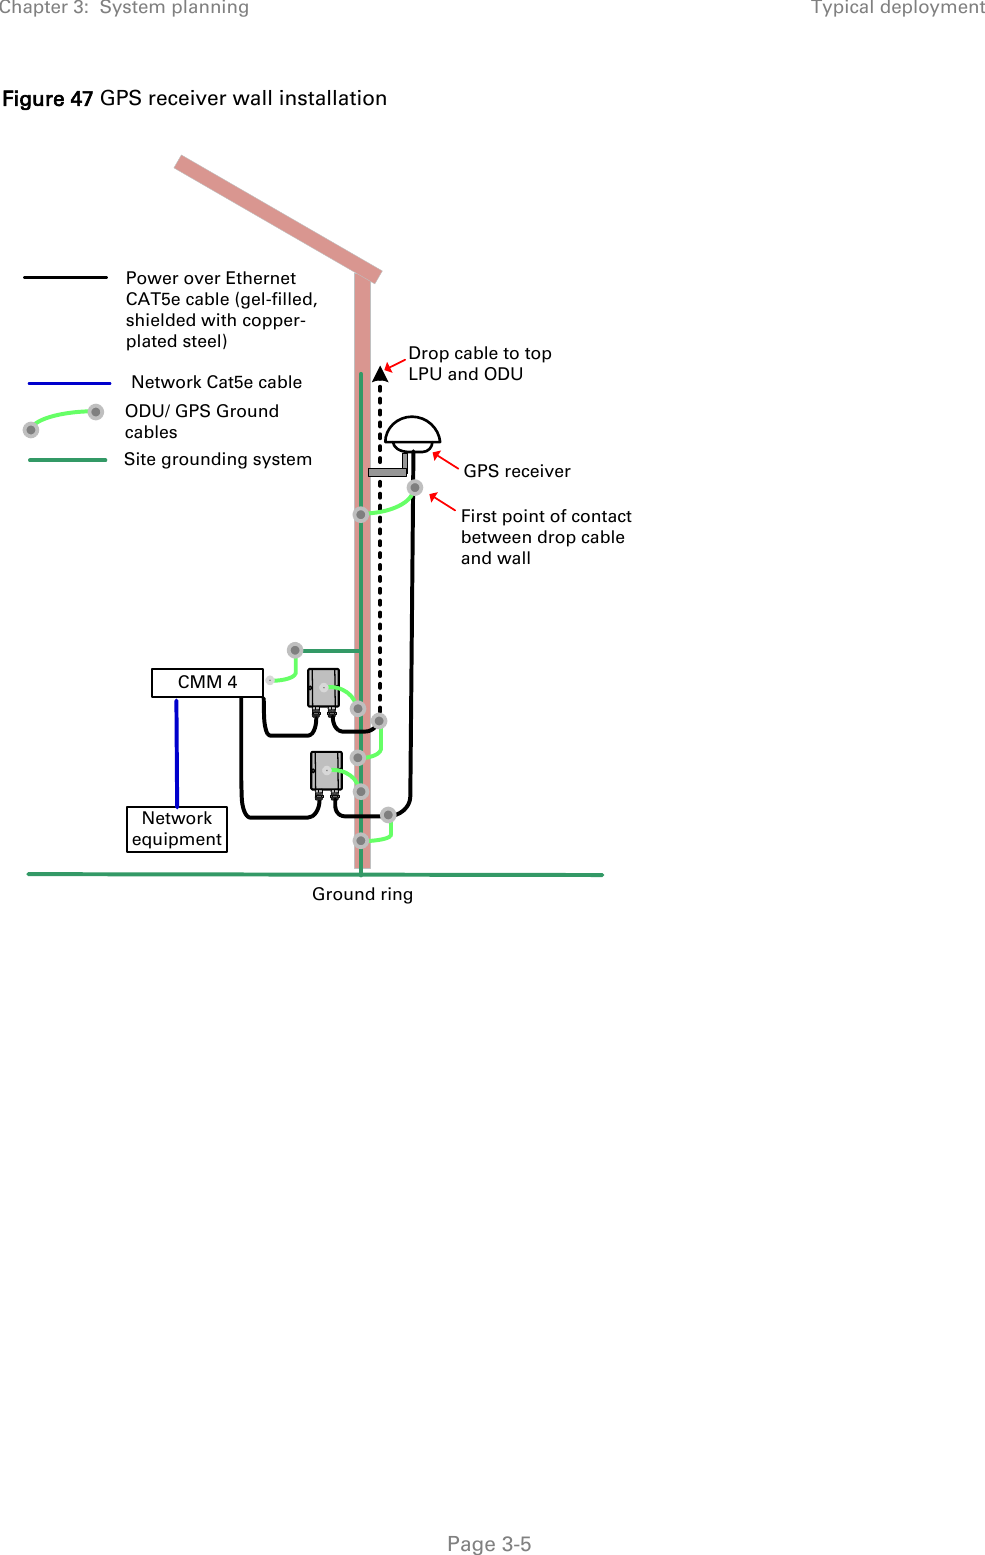 Chapter 3:  System planning Typical deployment   Page 3-5 Figure 47 GPS receiver wall installation  NetworkequipmentODU/ GPS Ground cablesSite grounding systemDrop cable to top LPU and ODUGround ringPower over Ethernet CAT5e cable (gel-filled, shielded with copper-plated steel)Network Cat5e cableCMM 4GPS receiverFirst point of contact between drop cable and wall      